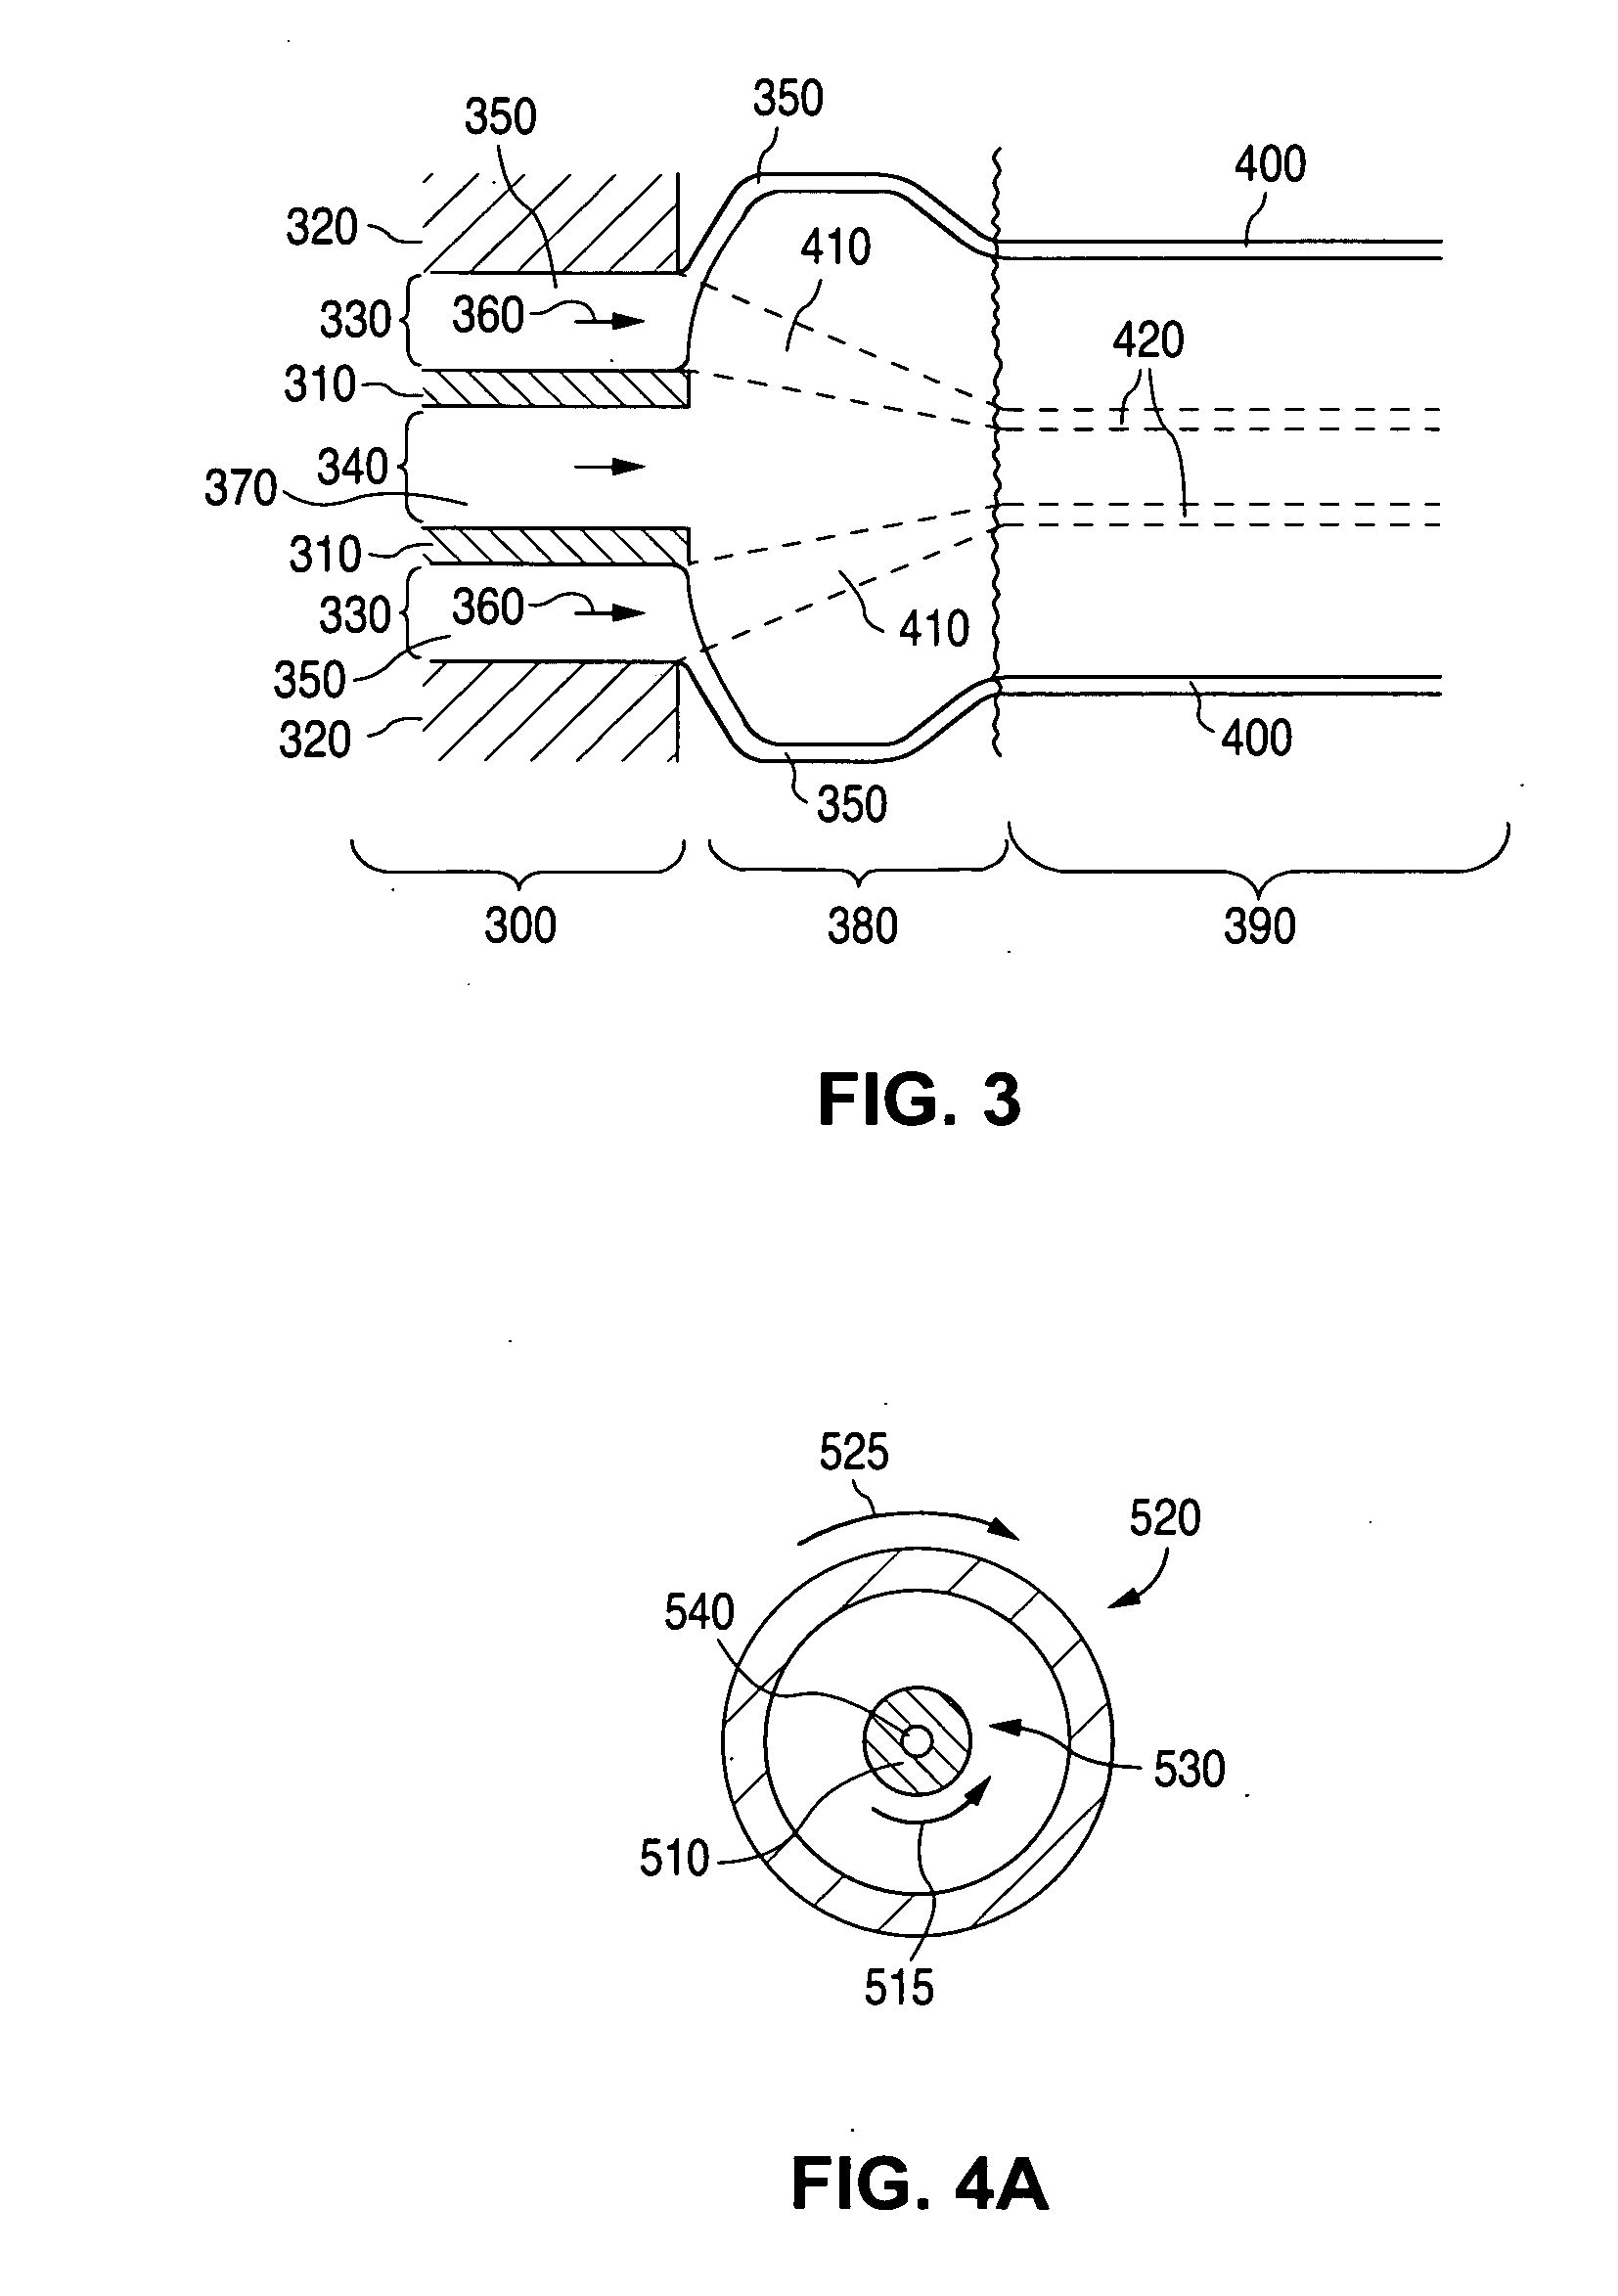 Method of fabricating an implantable medical device with biaxially oriented polymers